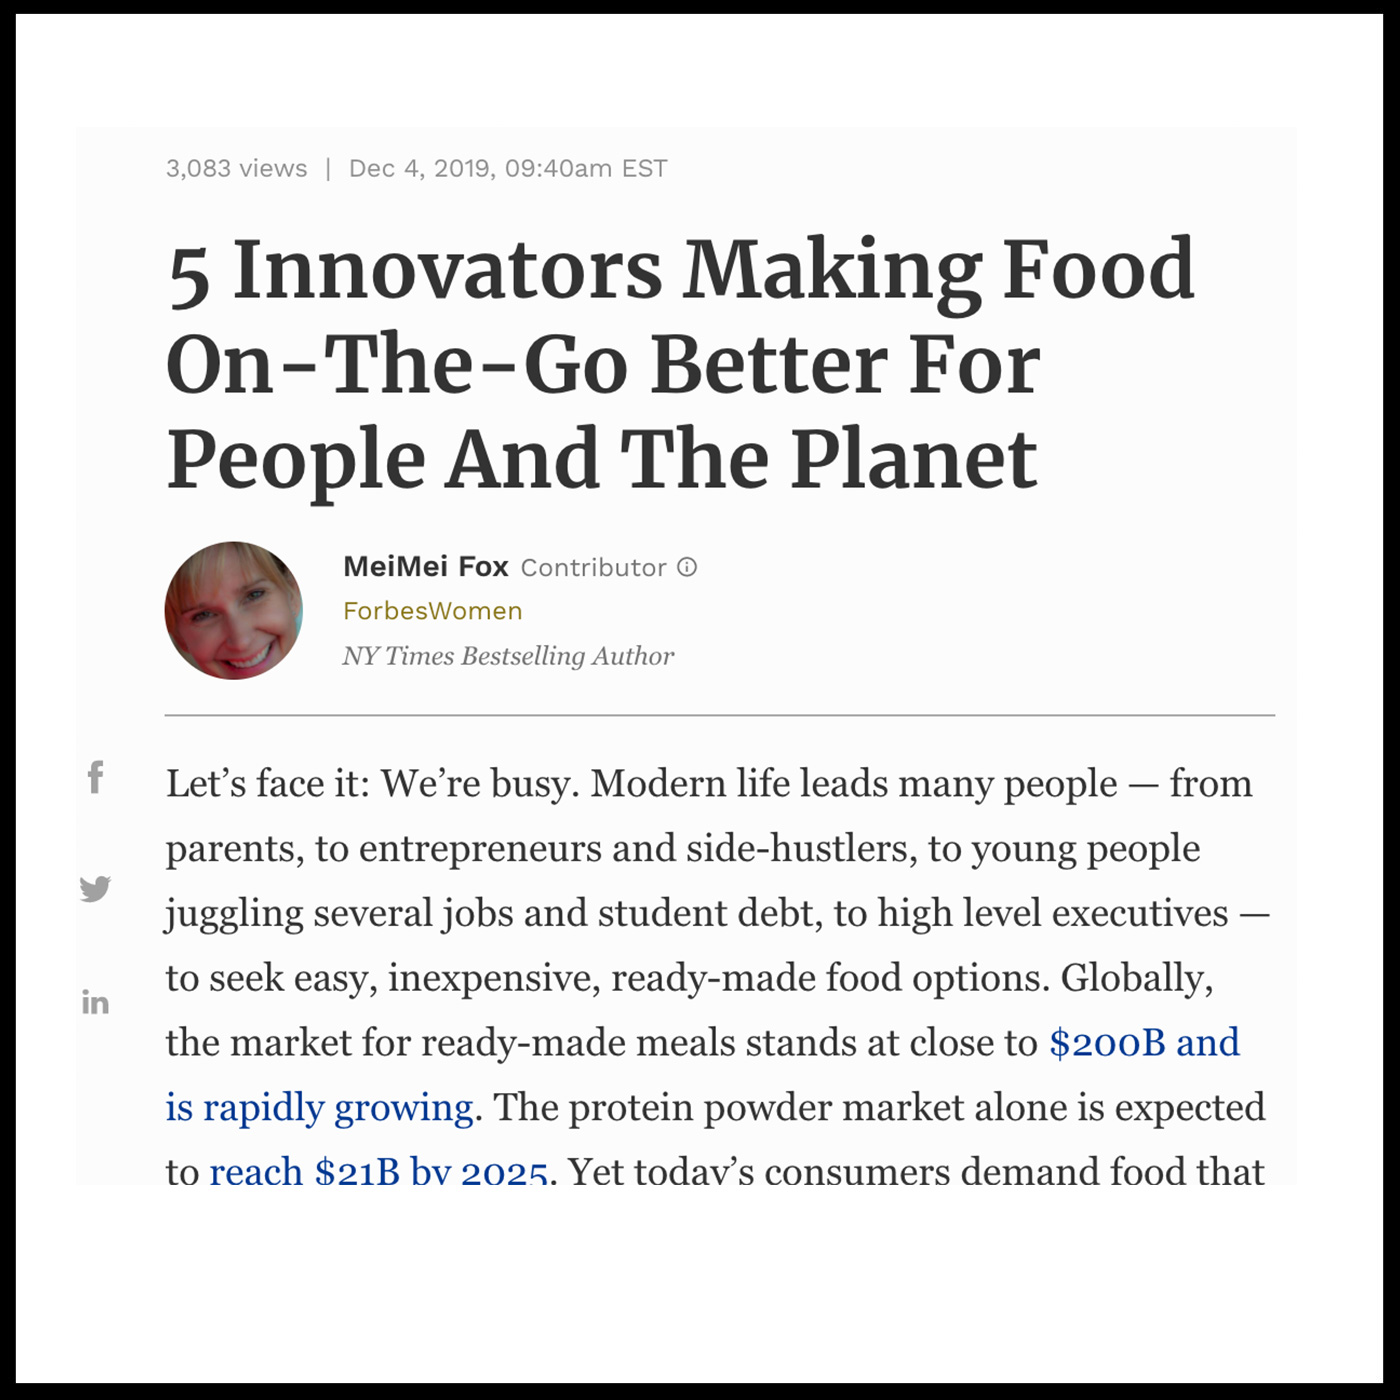 Forbes: 5 Innovators Making Food On-The-Go Better for People and the Planet